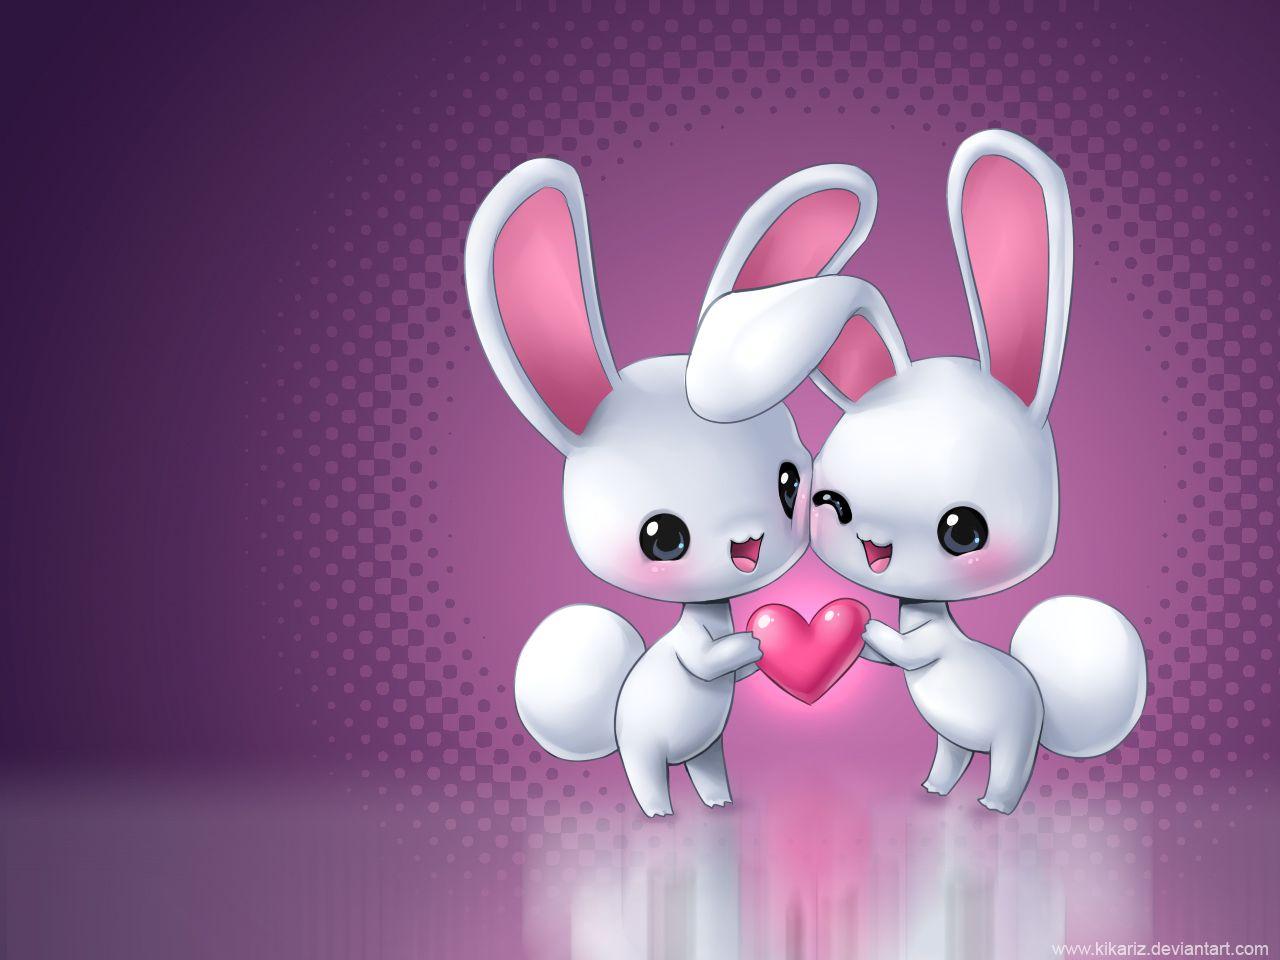 3D Animated Love Image 14 Cool HD Wallpaper